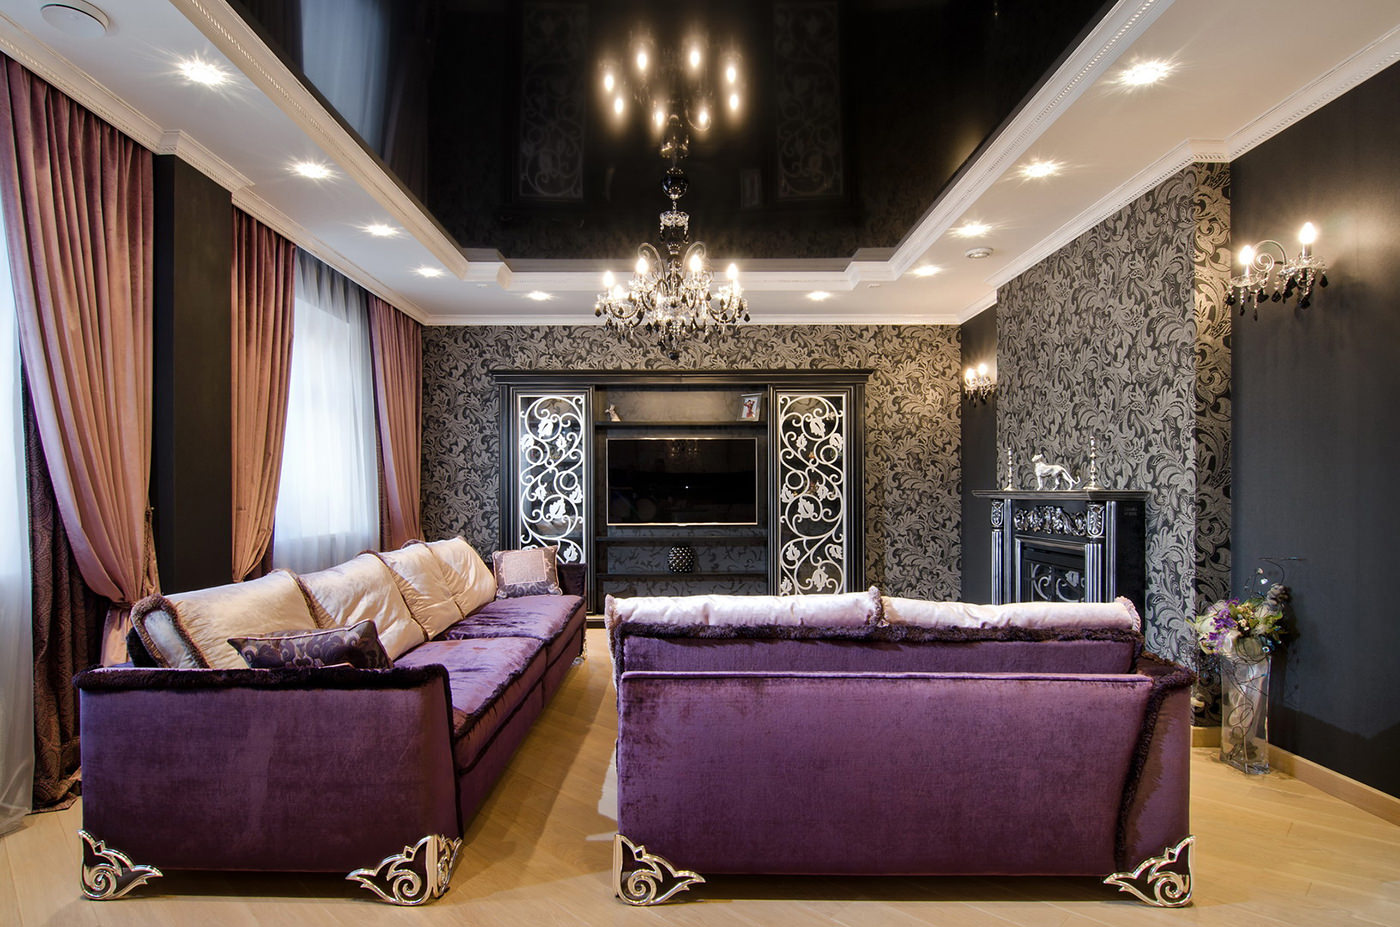 wallpaper in a luxurious living room